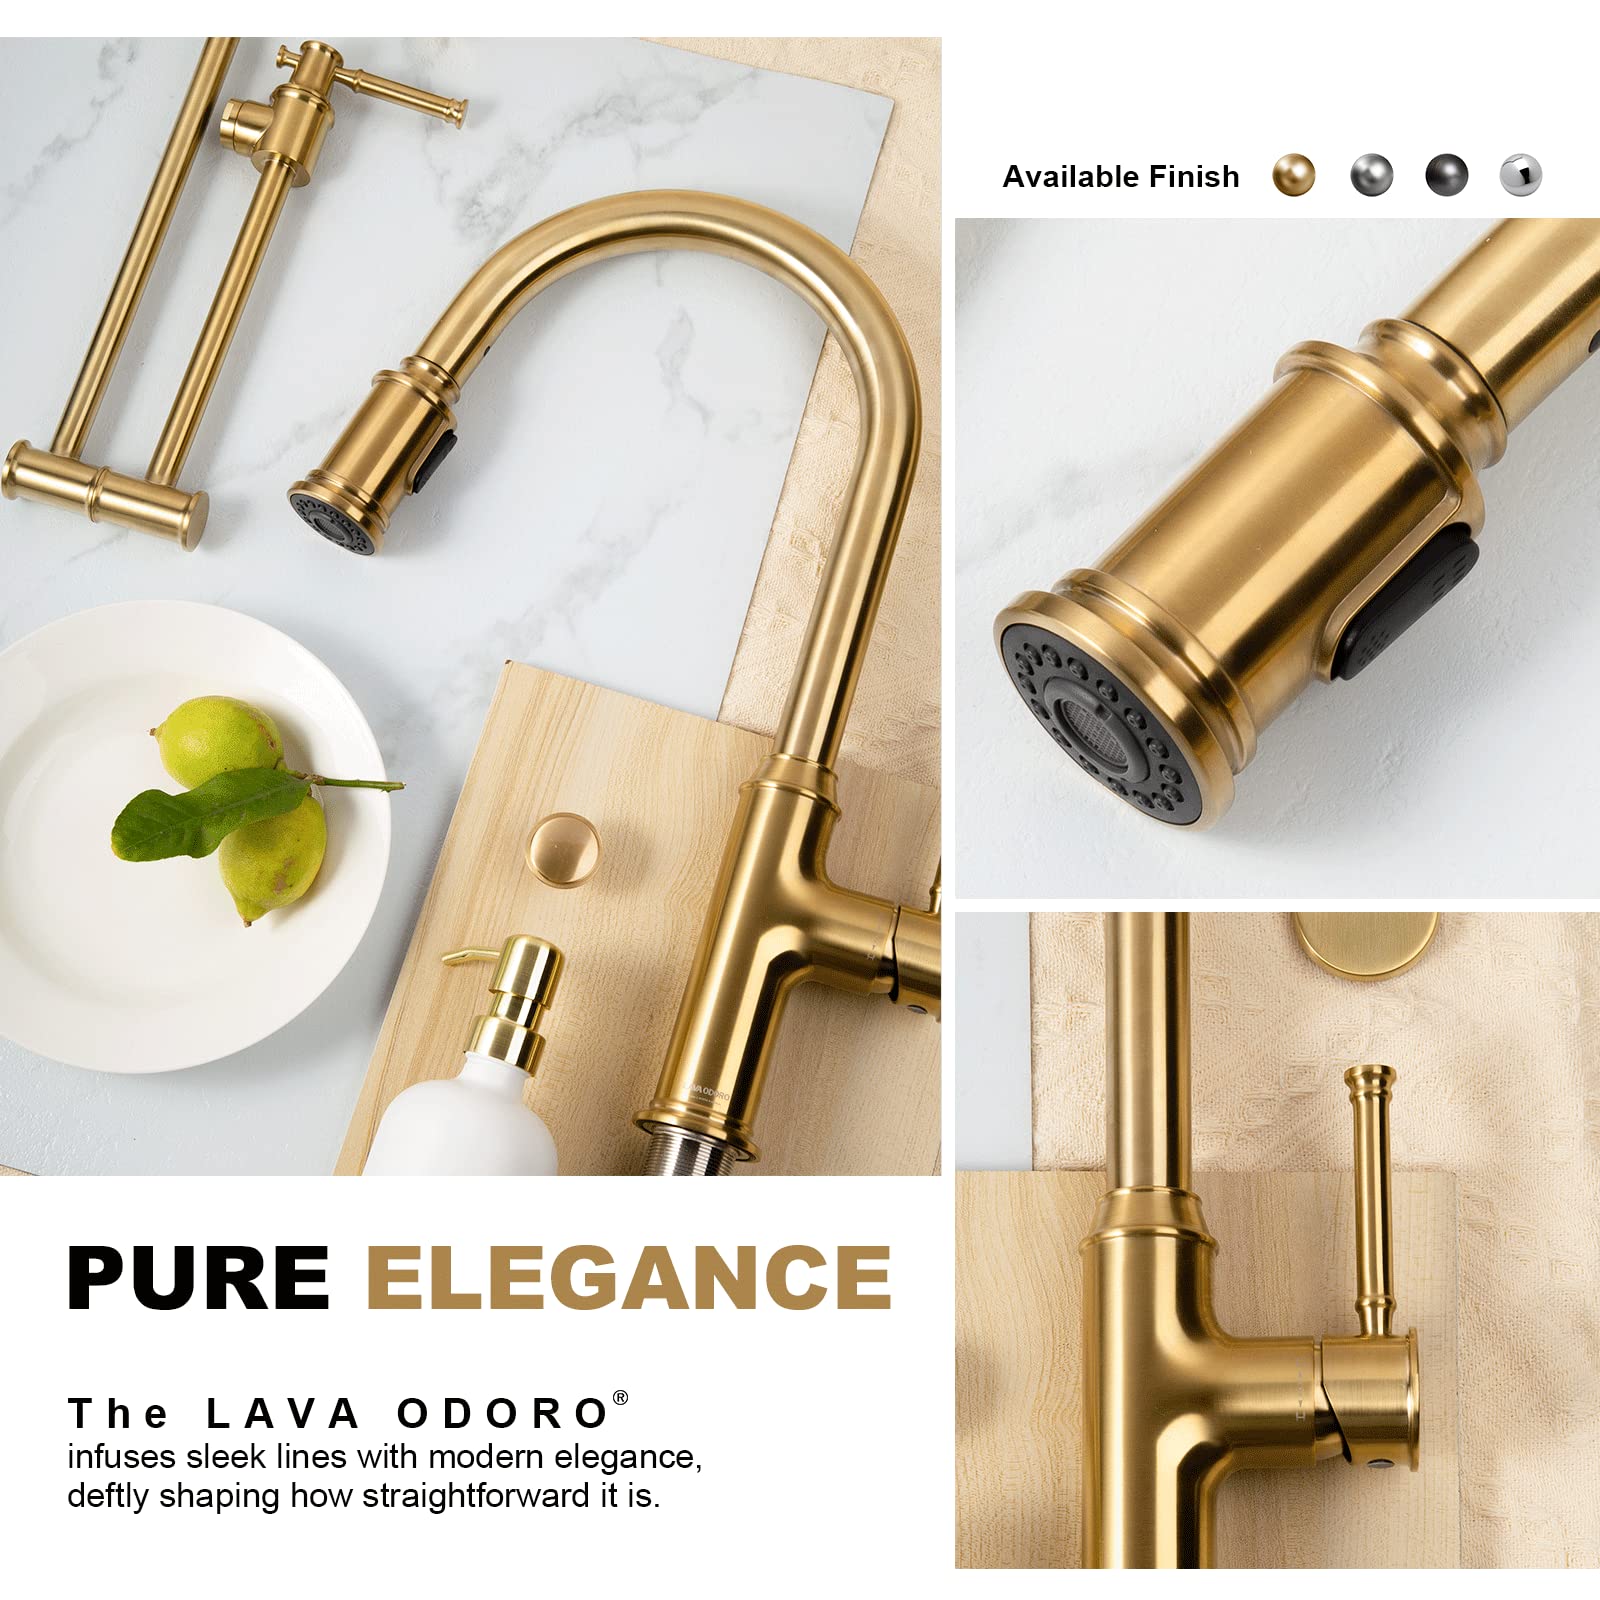 Brushed Gold Kitchen Faucet with Pull Down Sprayer, Lava Odoro Single Handle Gold Kitchen Sink Faucet, Brushed Brass Faucet for Kitchen Sink 1 Hole and 3 Hole, Deck Plate Included, KF421-SG